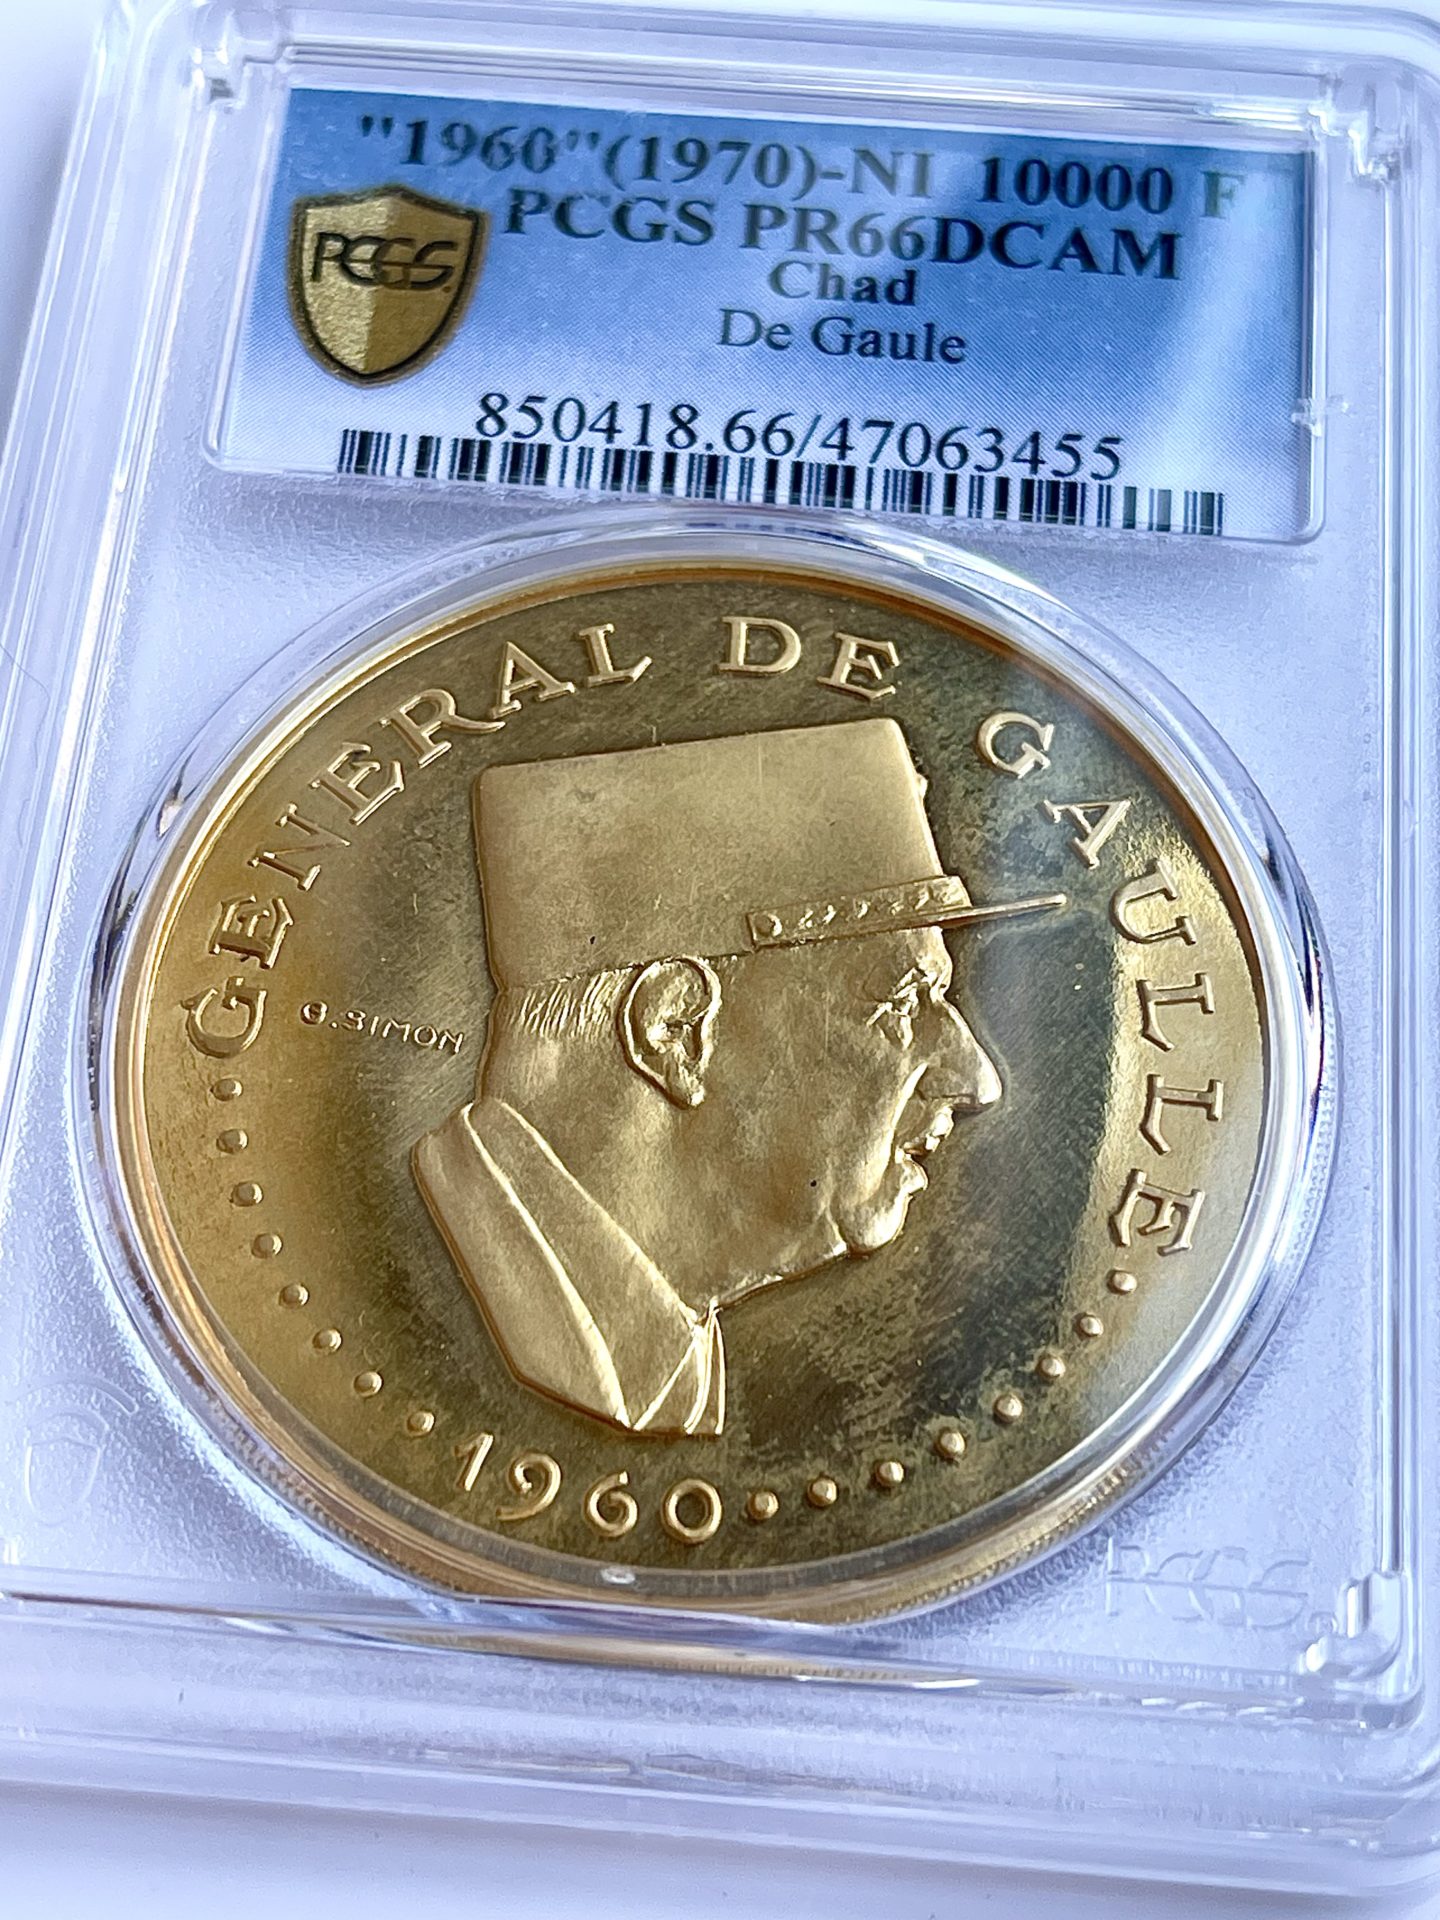 Chad independence anniversary 1960 10000 francs PCGS PR66 DCAM